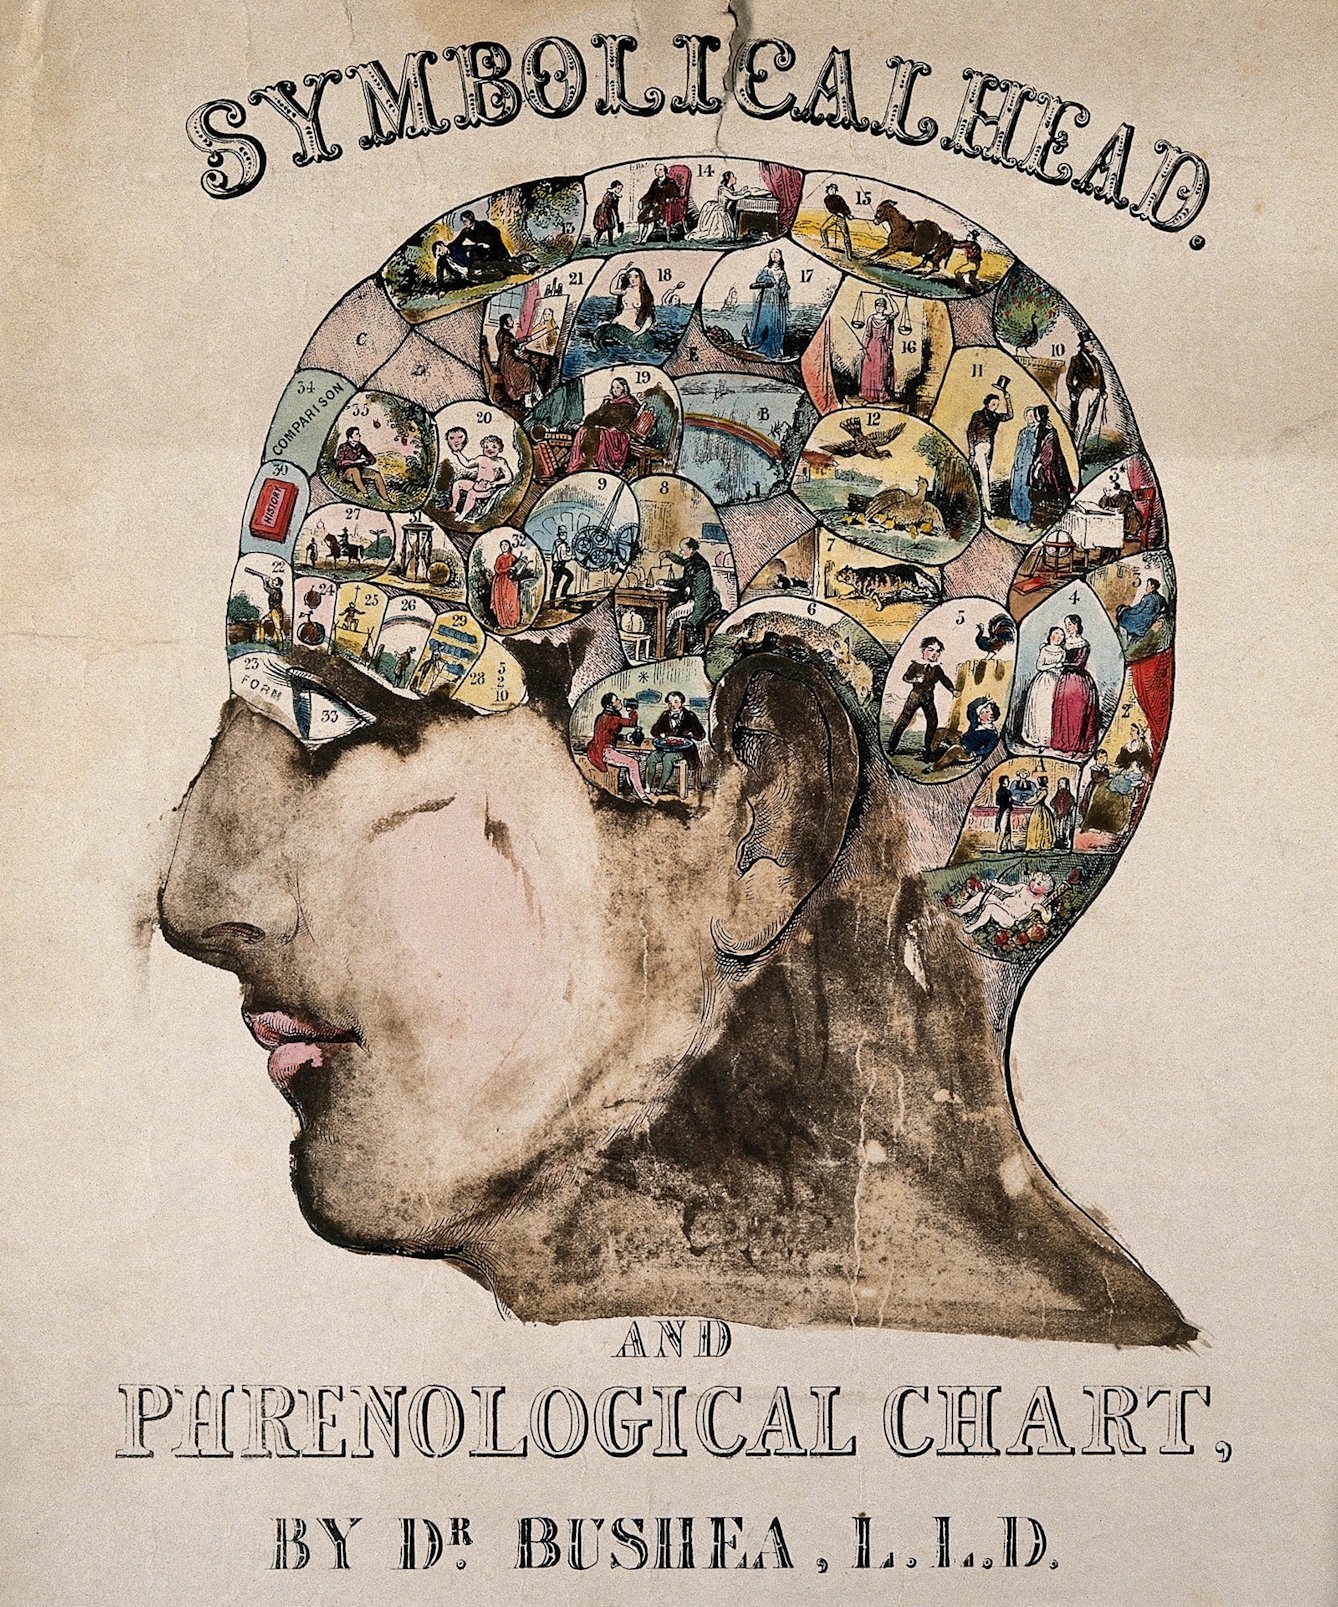 Coloured wood engraving showing the side profile of a human head with 30 different images inside.